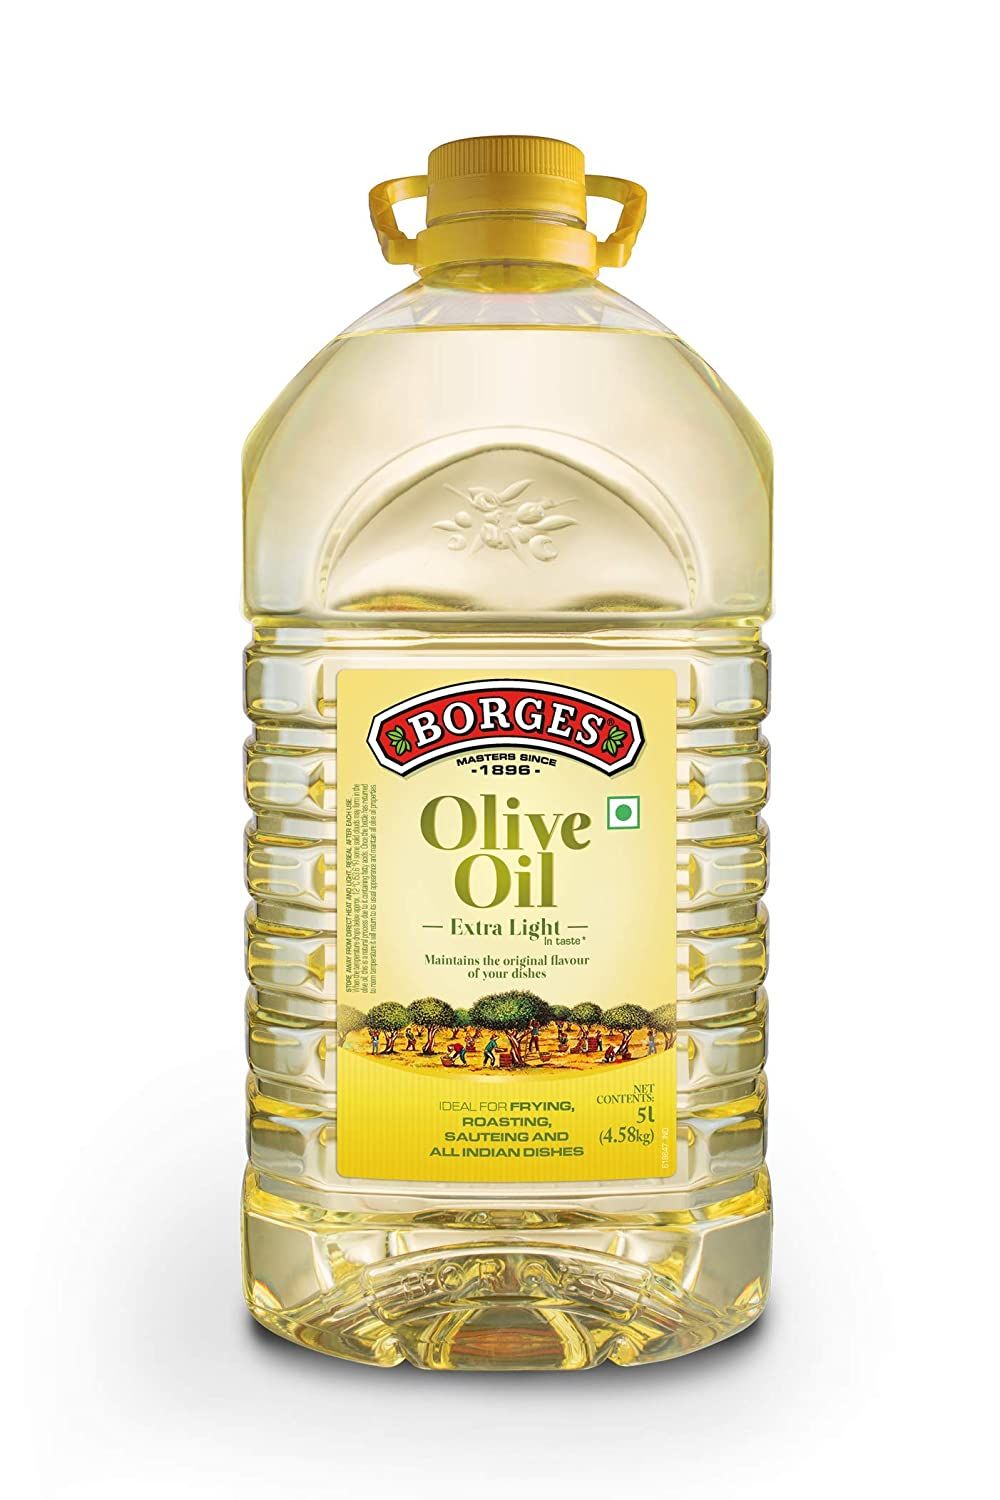 Borges Olive Oil Extra Light Image